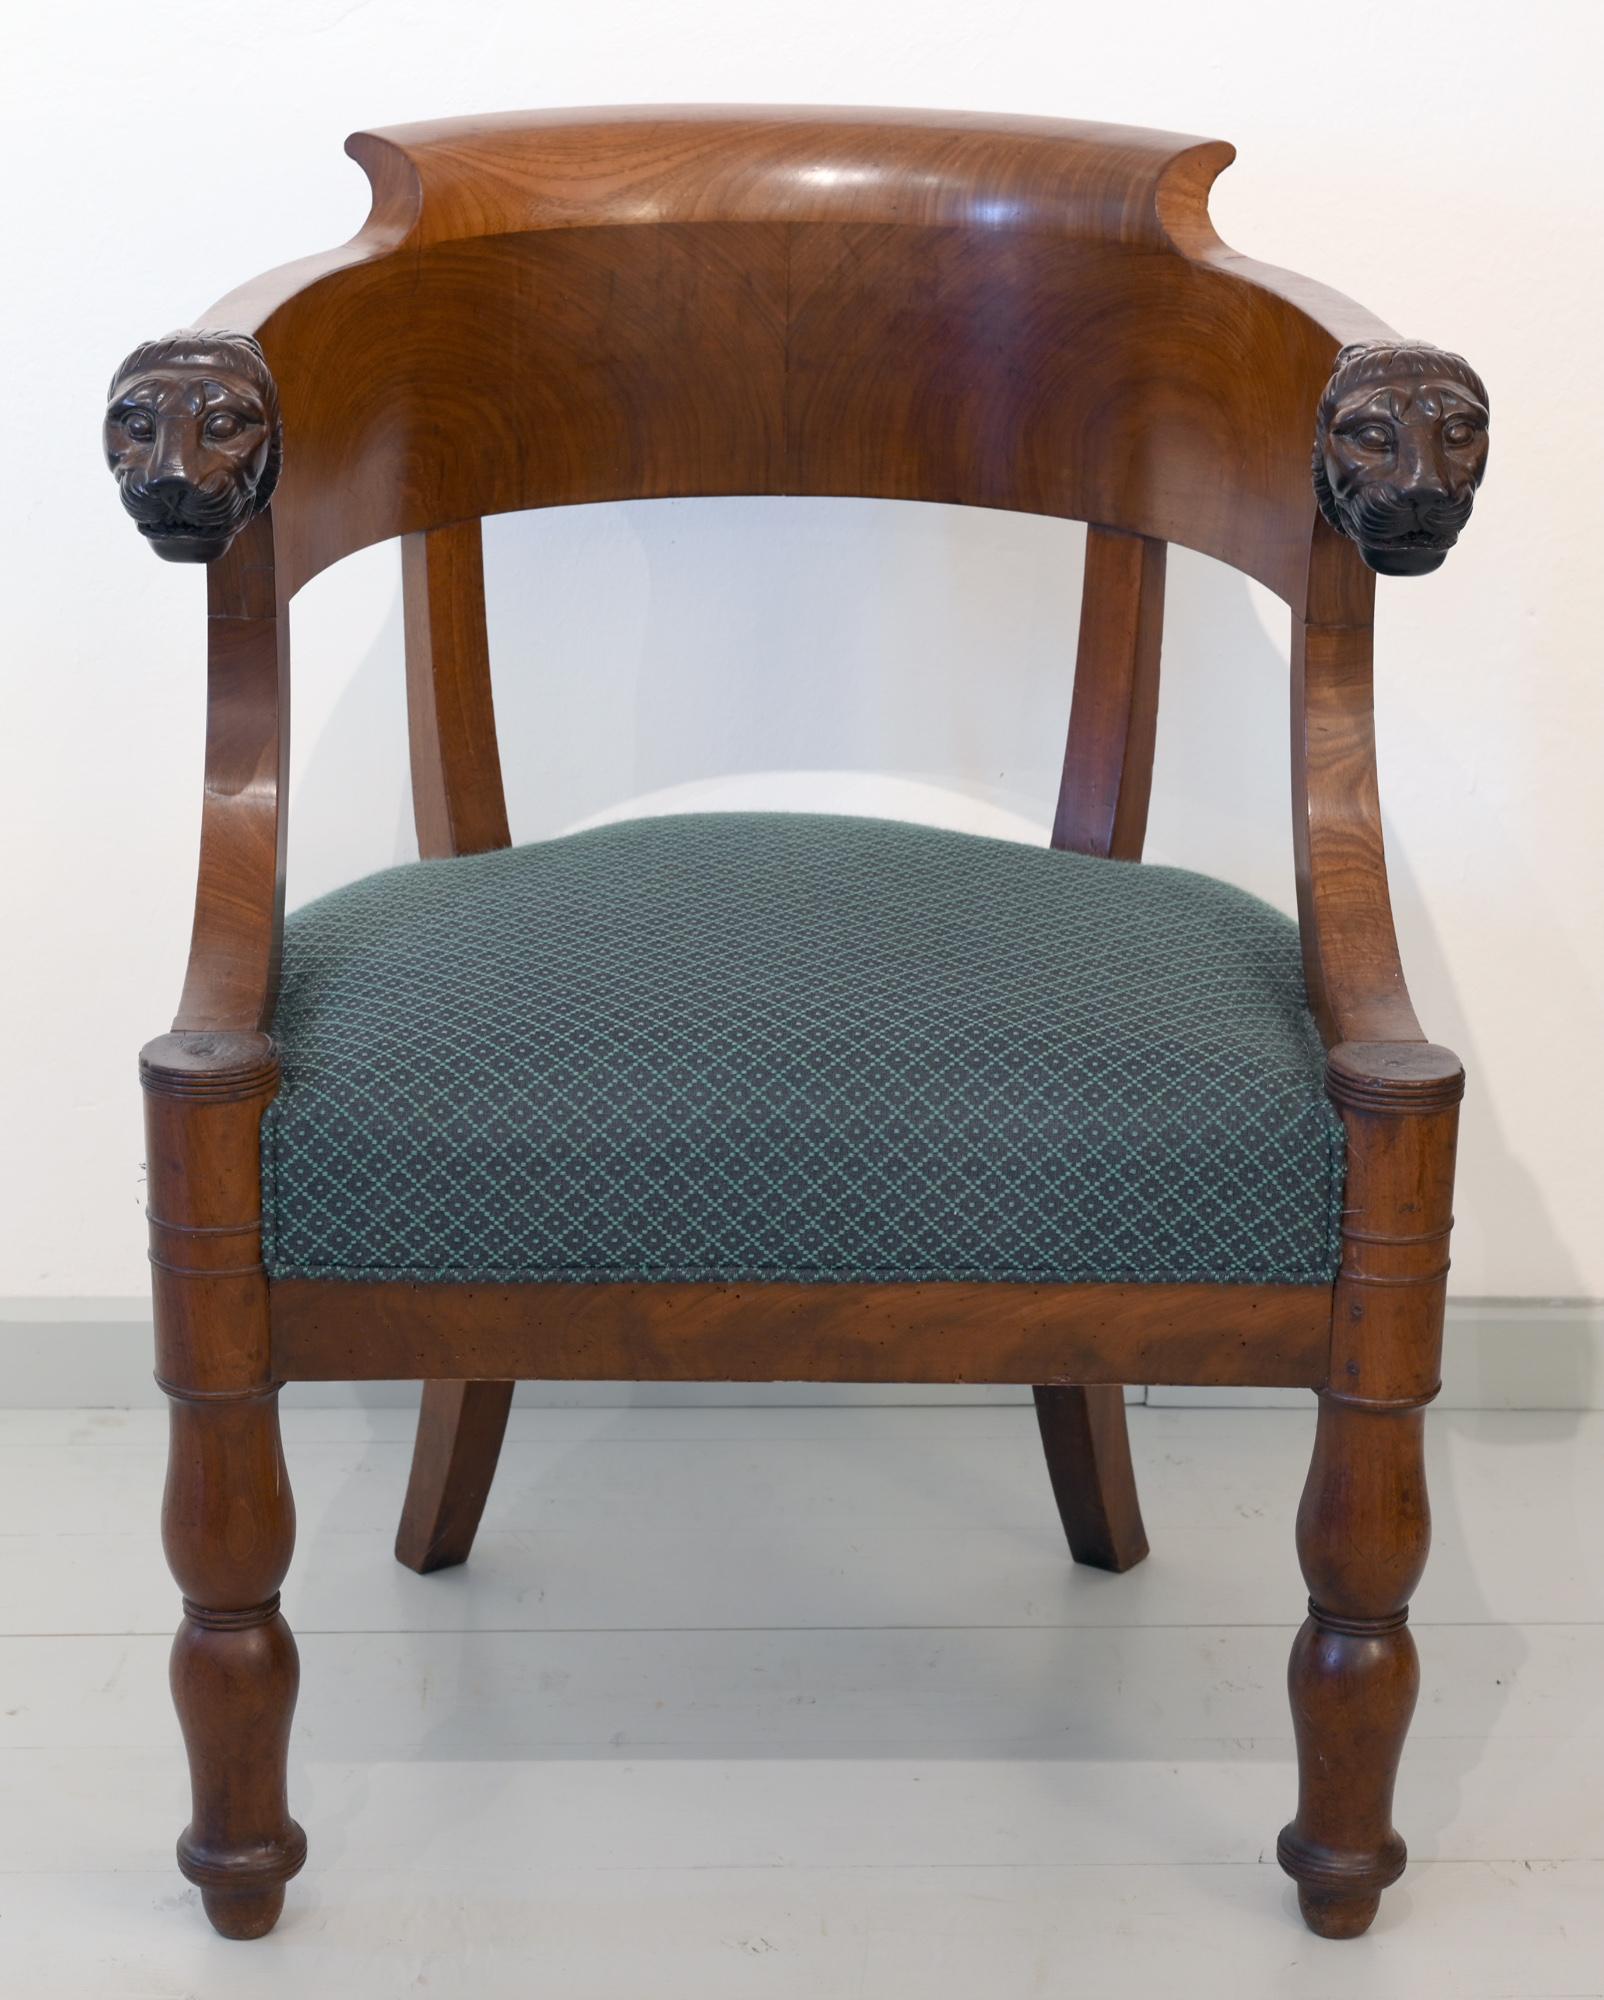 Very charming armchair which was made, circa 1795 in France out of very beautiful grained massive mahogany. The lion heads are worked out very fine. It is very confident to sit in this special chair.
The chair is perfect for using as office or desk